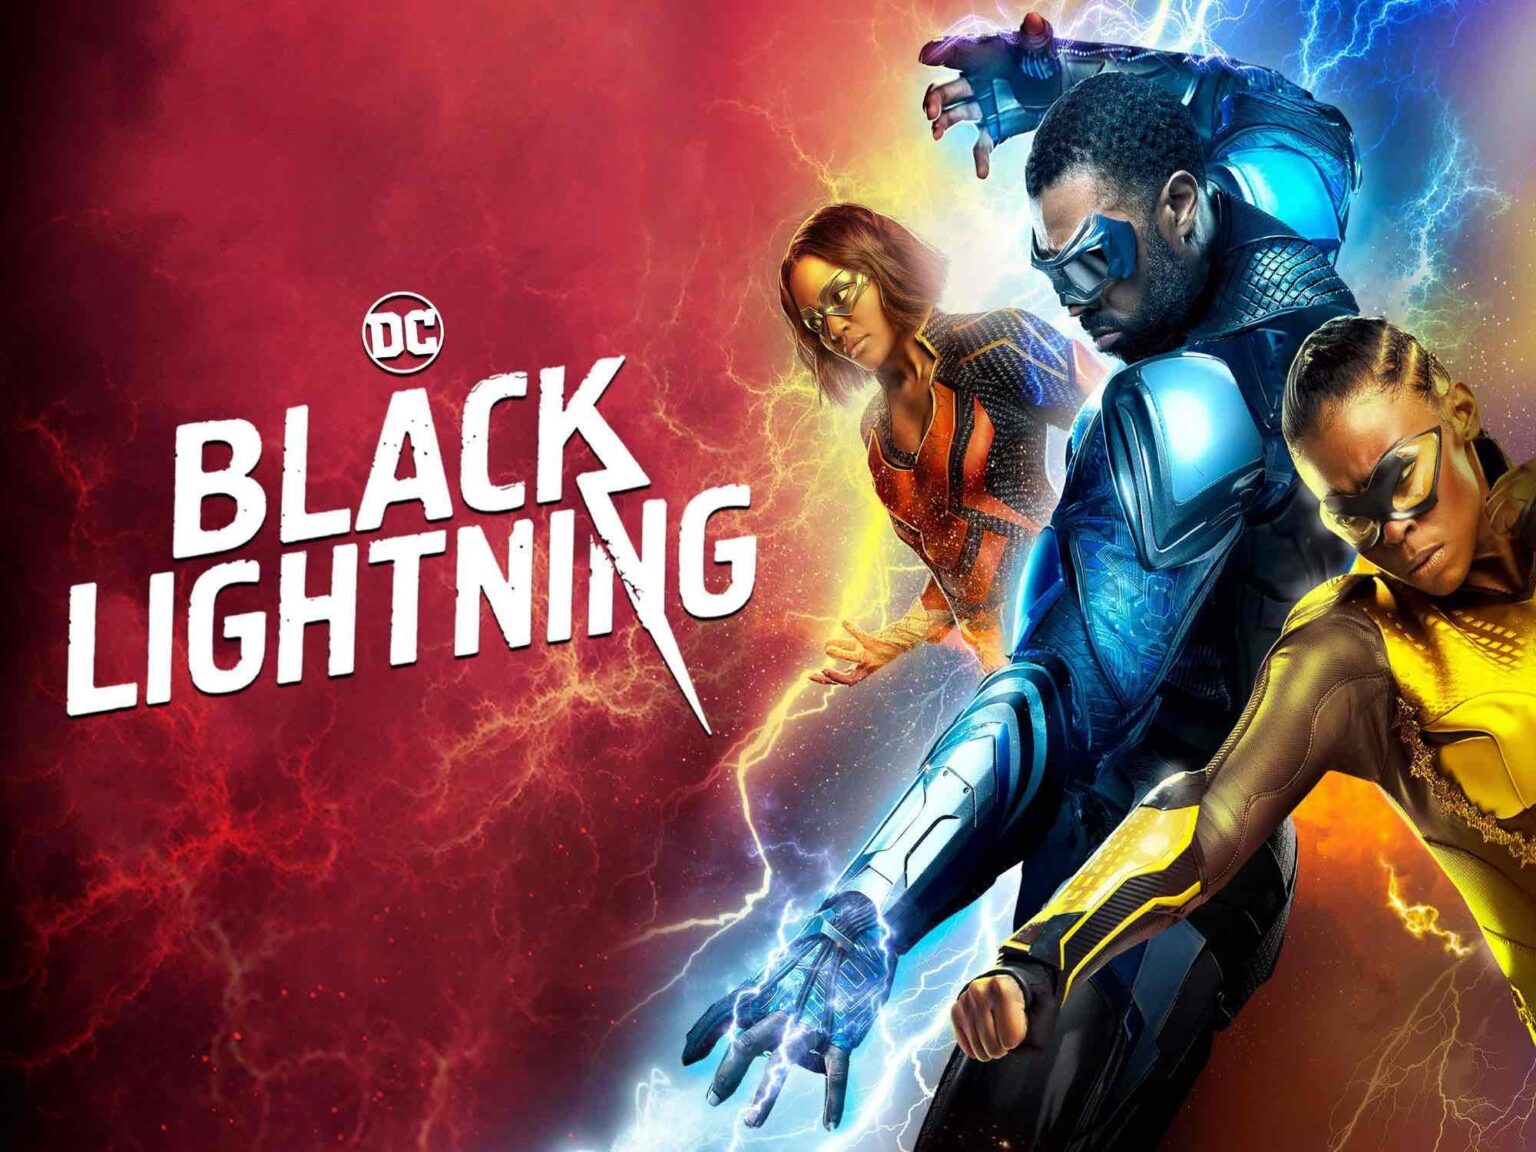 It looks like 'Black Lightning' will be spinning off a series of its own. What can we expect from the cast?